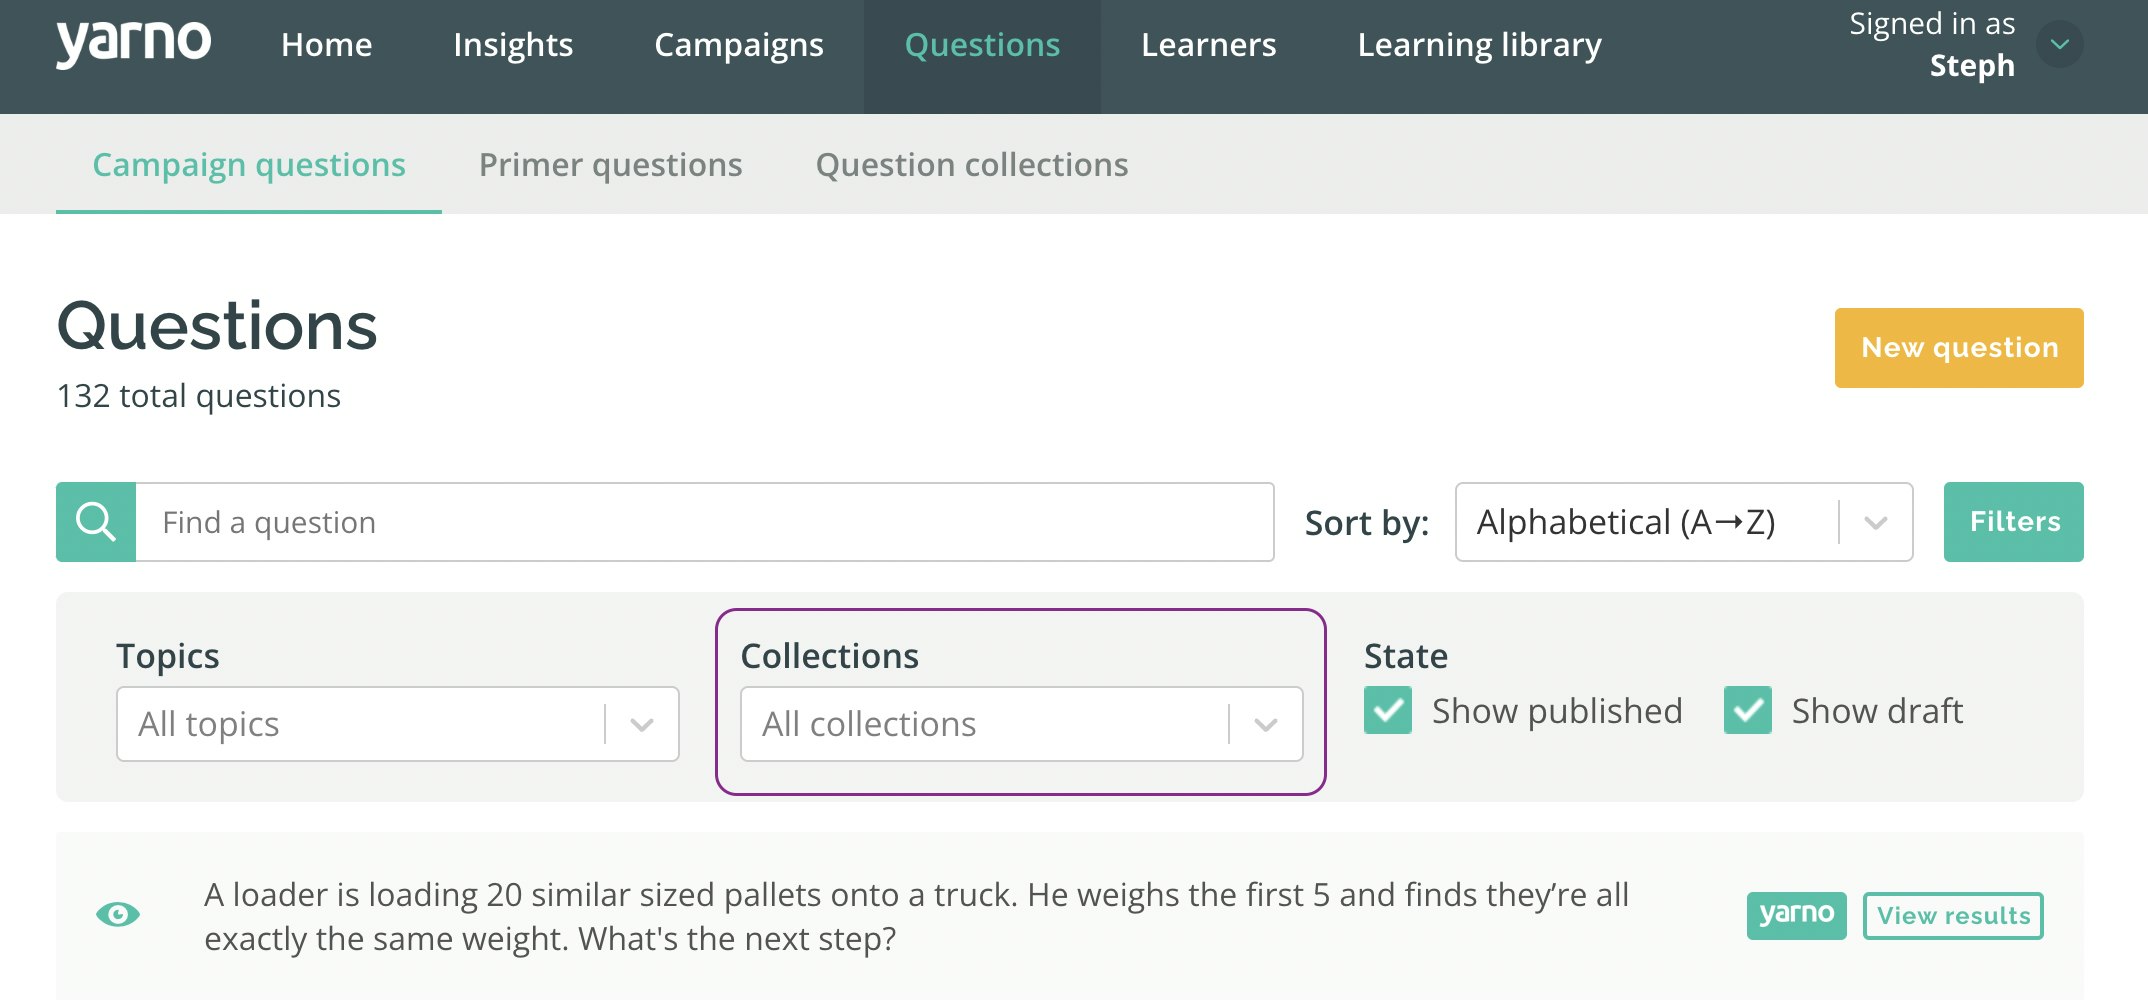 Collections option in question filter